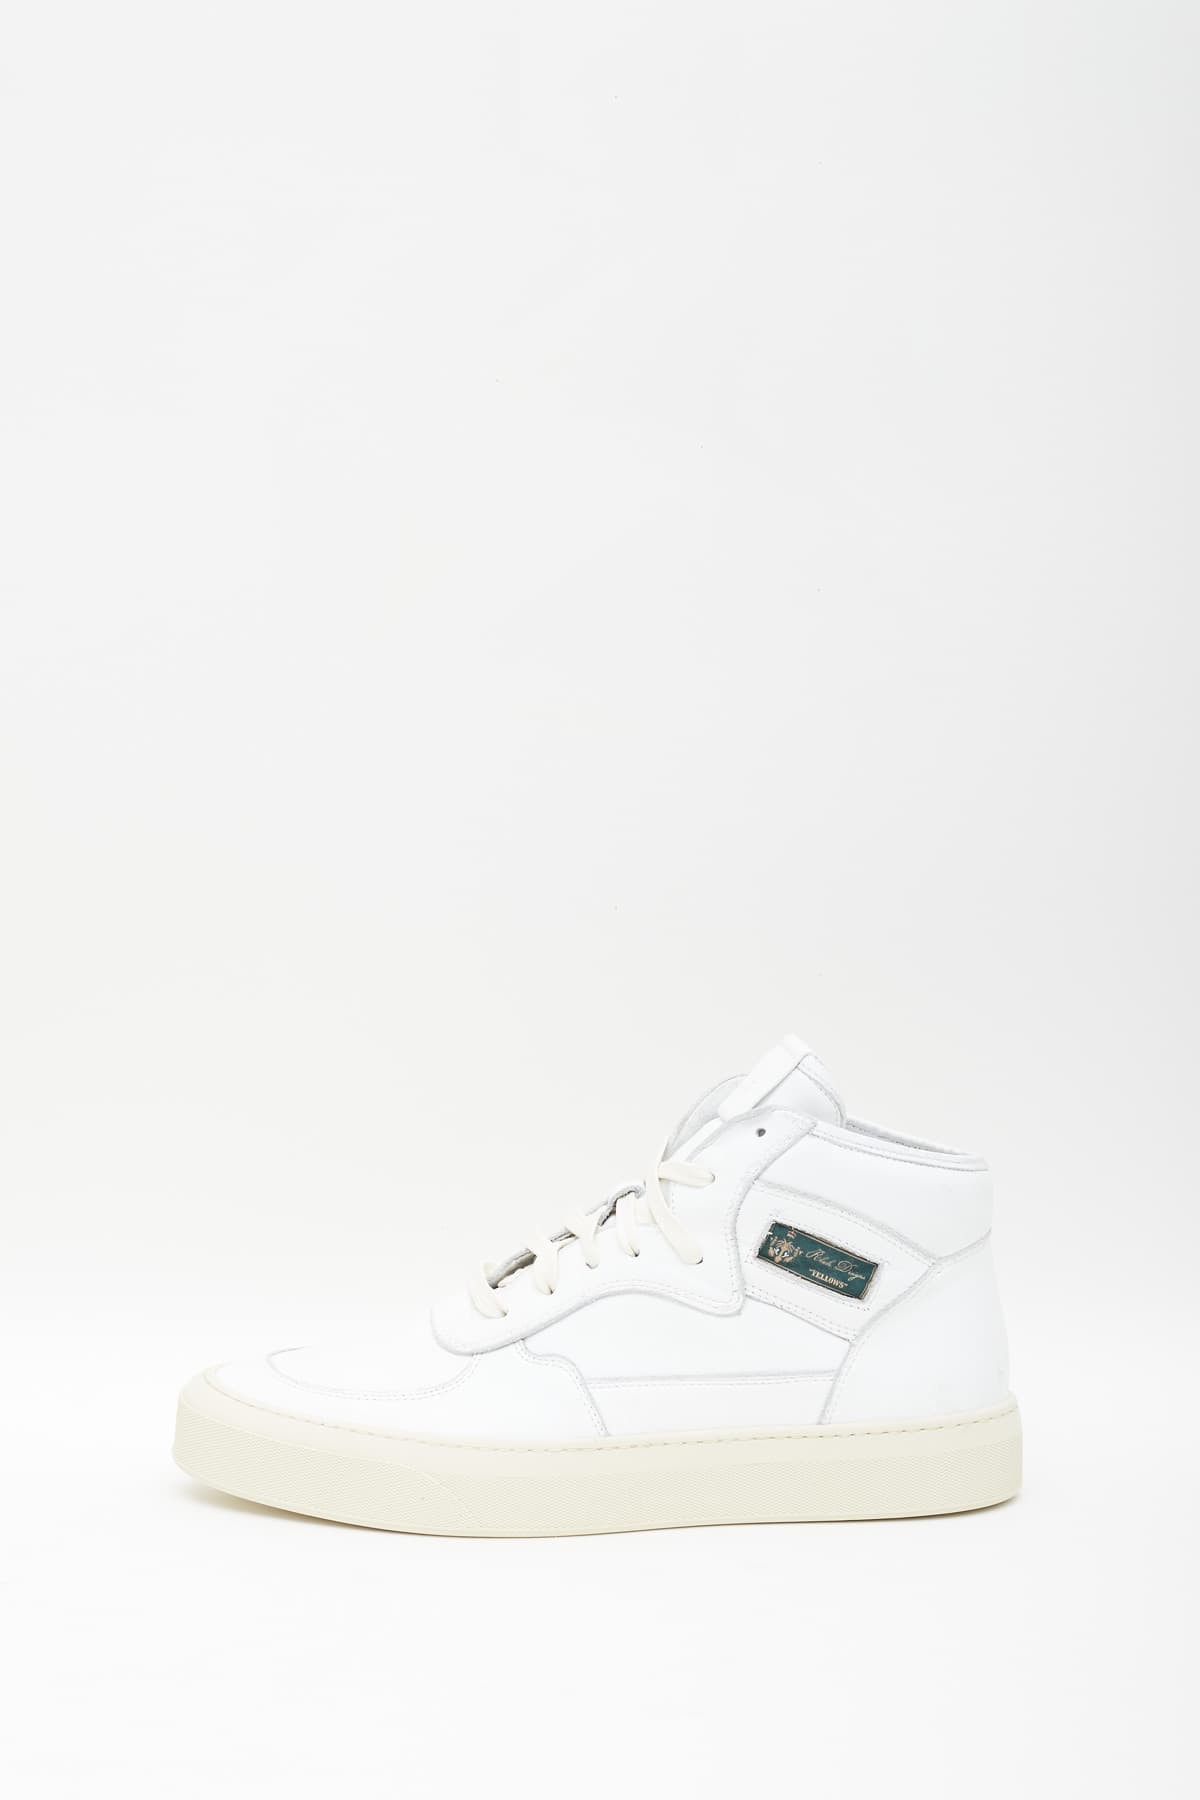 RHUDE WHITE CABRIOLETS HI SNEAKERS IAMNUE